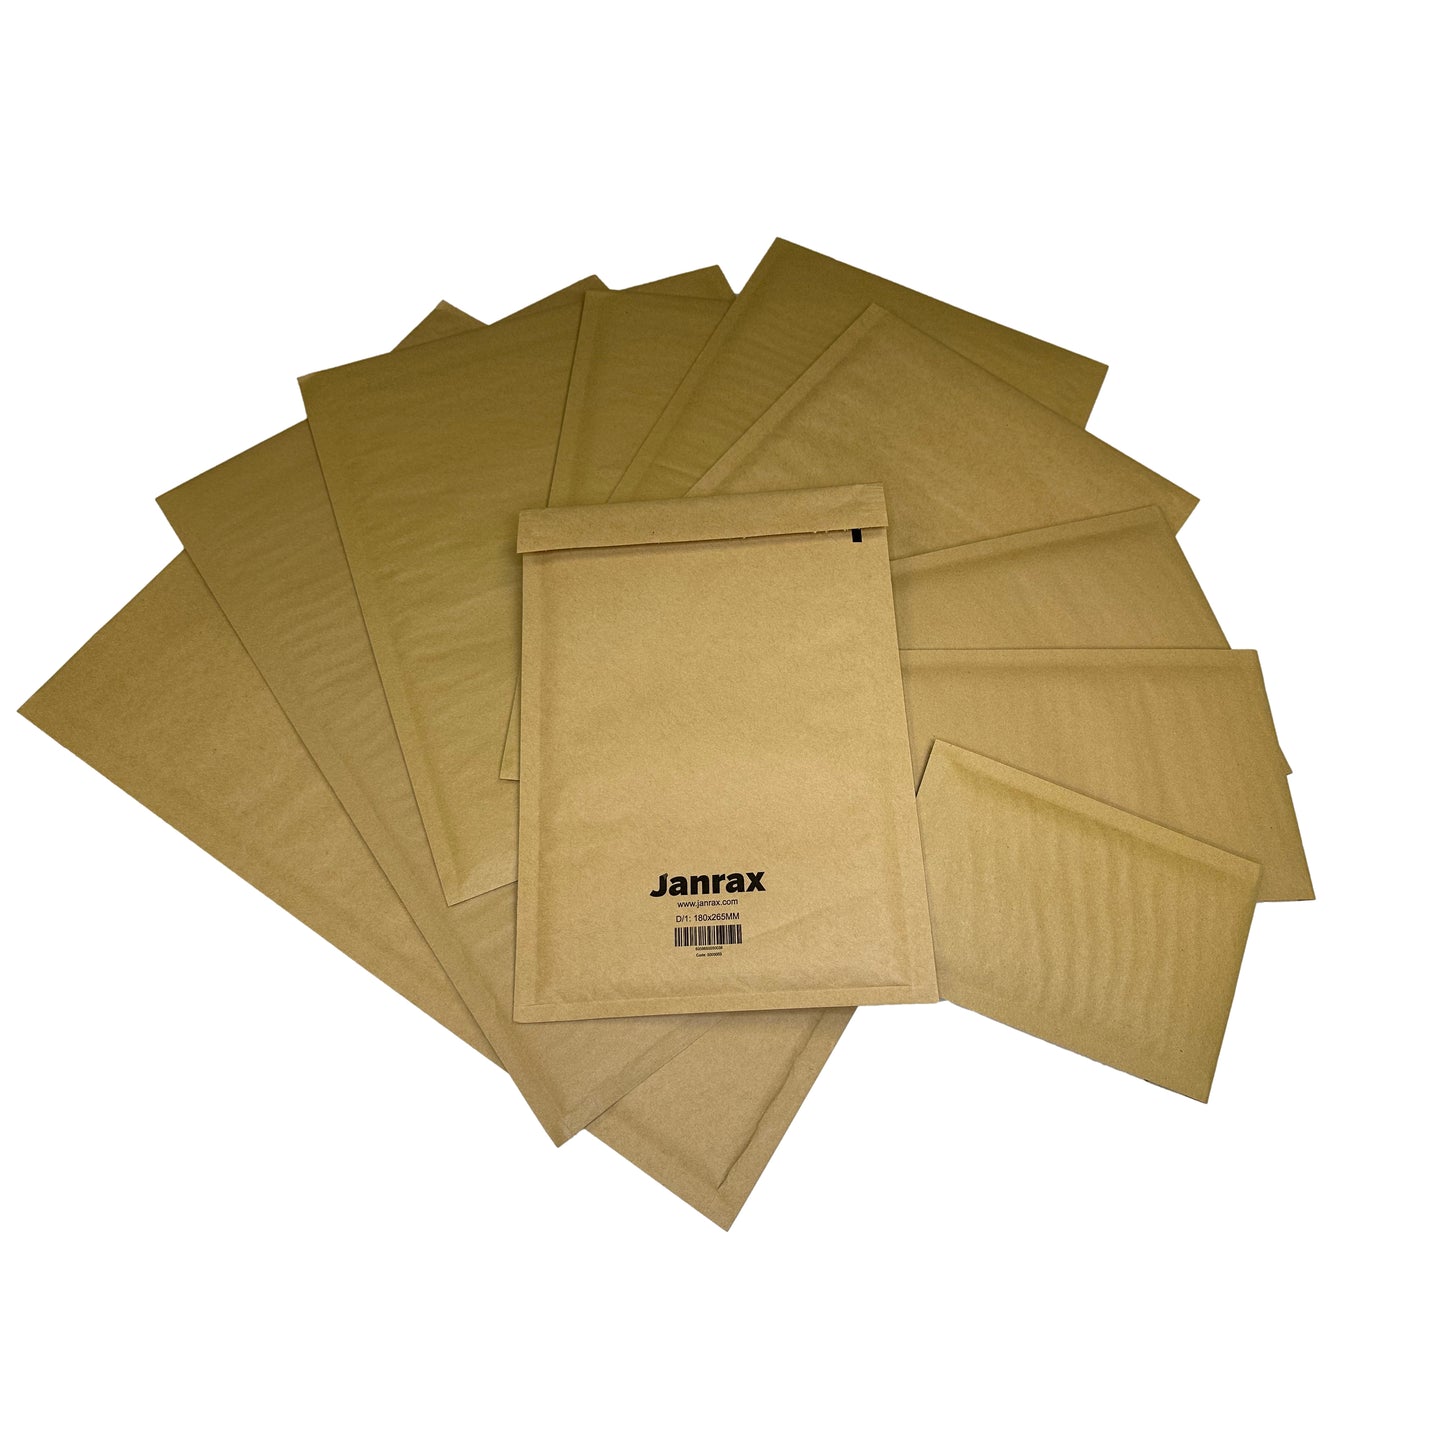 Bubble Lined Size 000/A Padded Brown Postal Envelope by Janrax